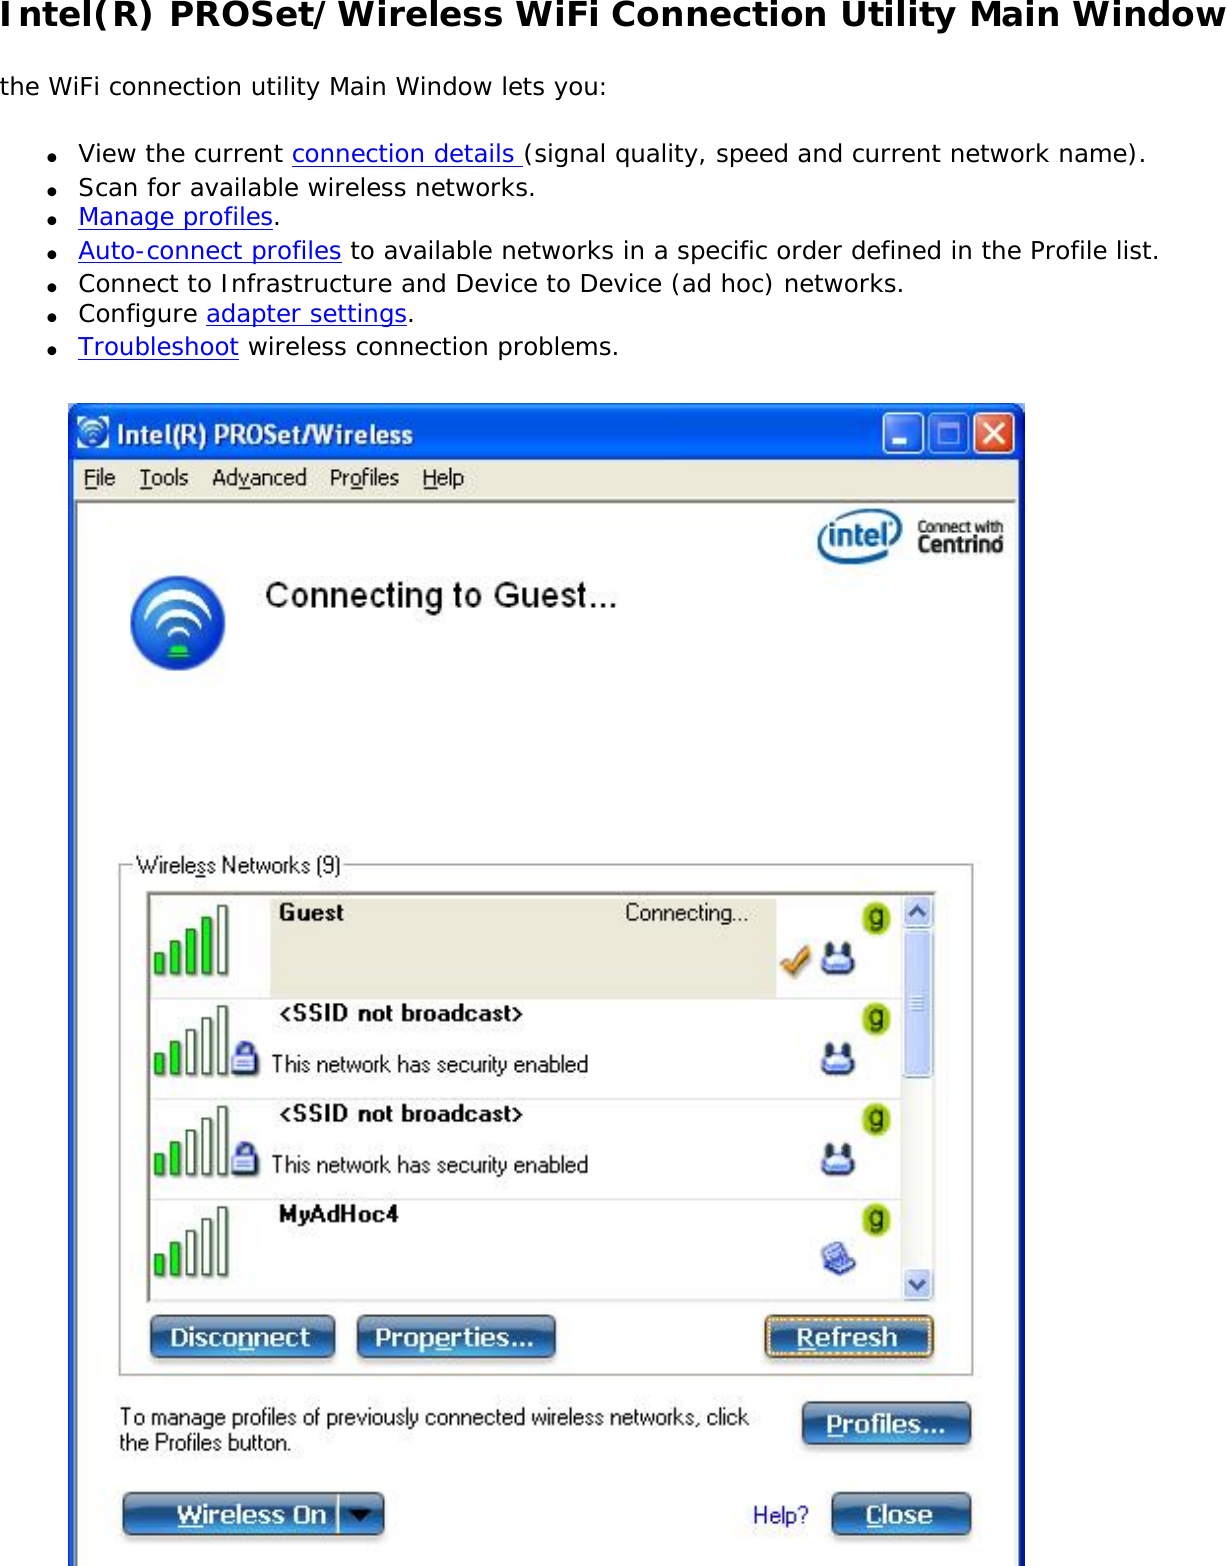 Intel(R) PROSet/Wireless WiFi Connection Utility Main Windowthe WiFi connection utility Main Window lets you:●     View the current connection details (signal quality, speed and current network name).●     Scan for available wireless networks.●     Manage profiles.●     Auto-connect profiles to available networks in a specific order defined in the Profile list.●     Connect to Infrastructure and Device to Device (ad hoc) networks.●     Configure adapter settings.●     Troubleshoot wireless connection problems.